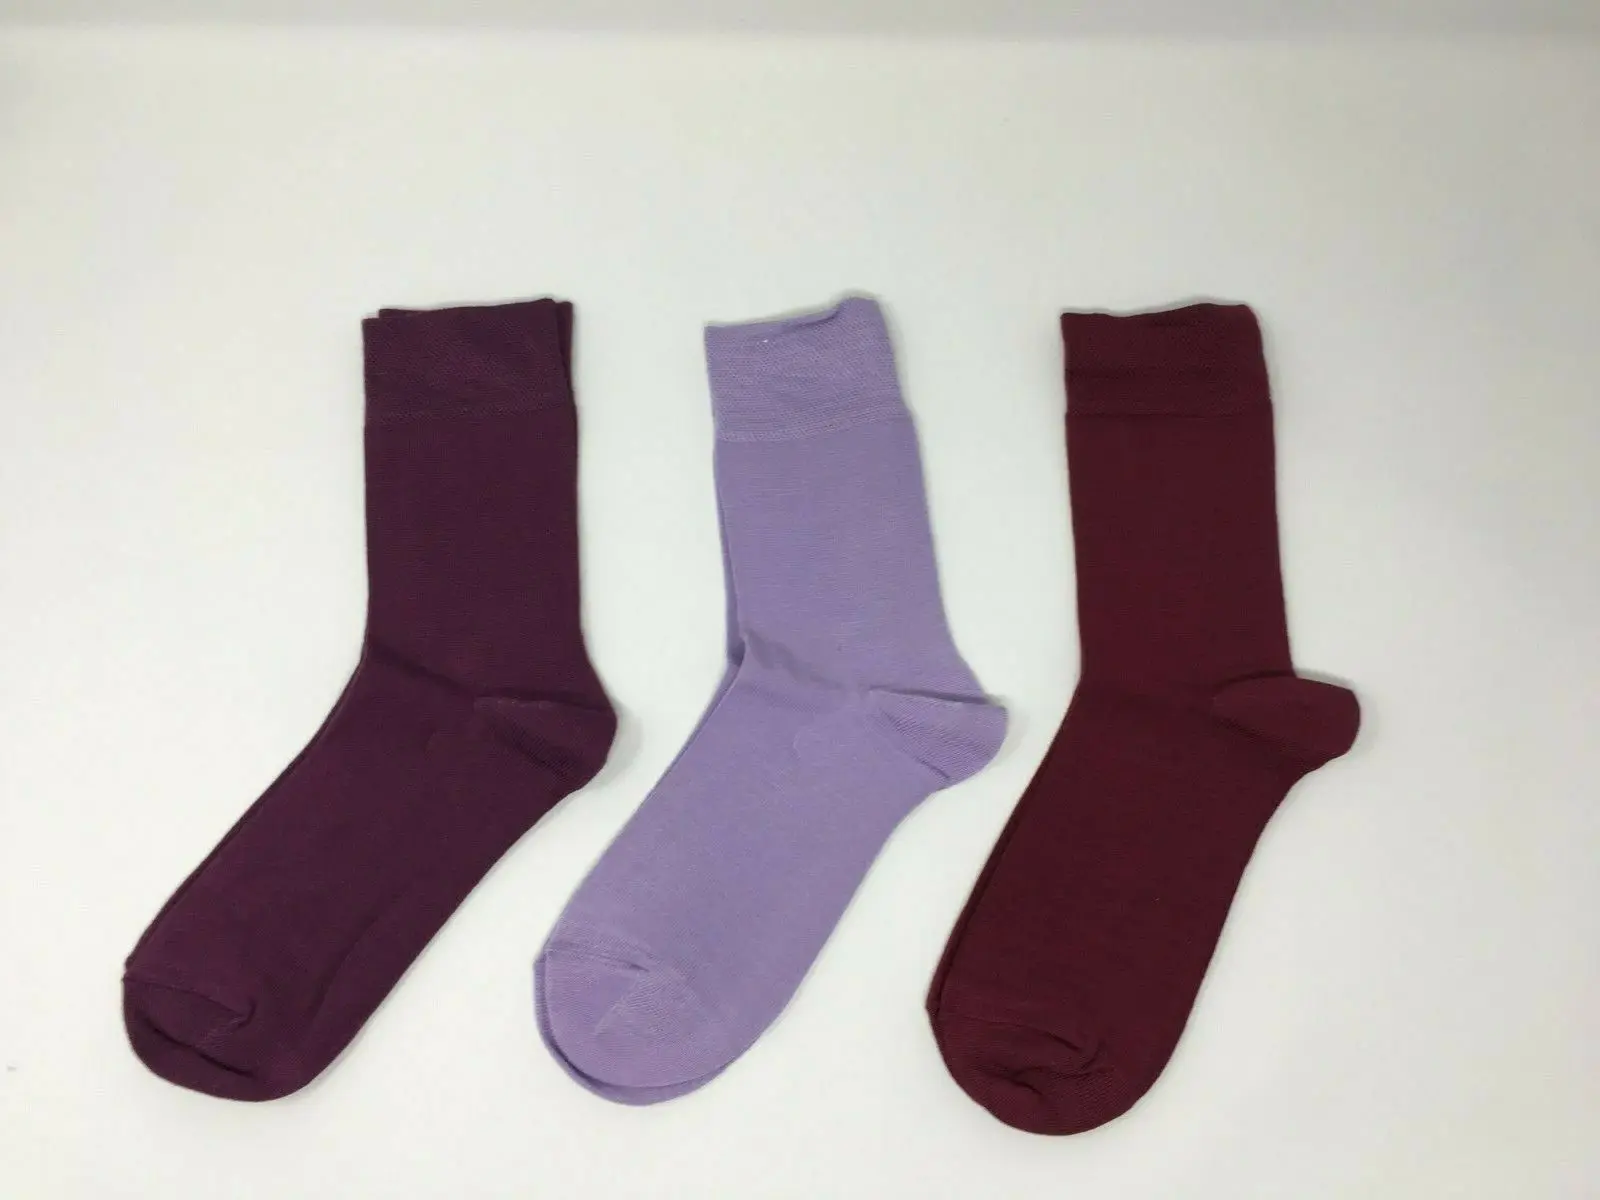 Luxury Bamboo Extra Soft Ladies Ankle high socks in BLUE Size 4-7 3 pairs BN 